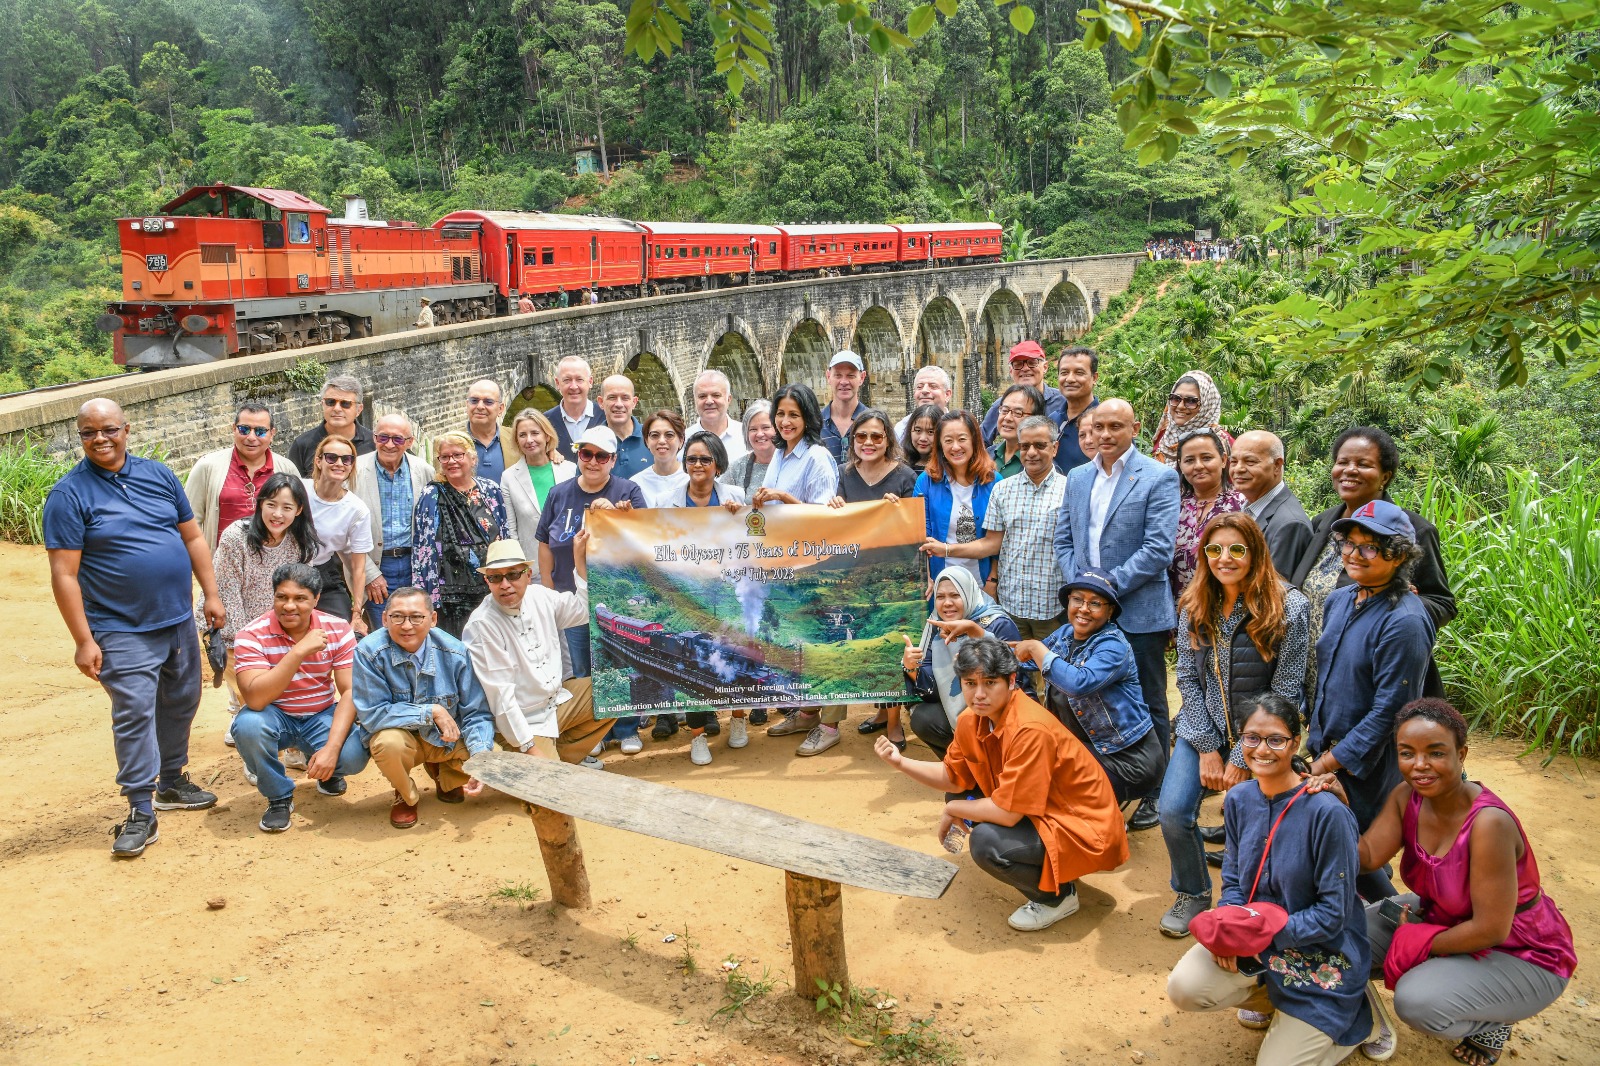 The Ella Odyssey: 75 Years of Diplomacy – Foreign Heads of Mission on Familiarization Tour of Sri Lanka’s Hill Country